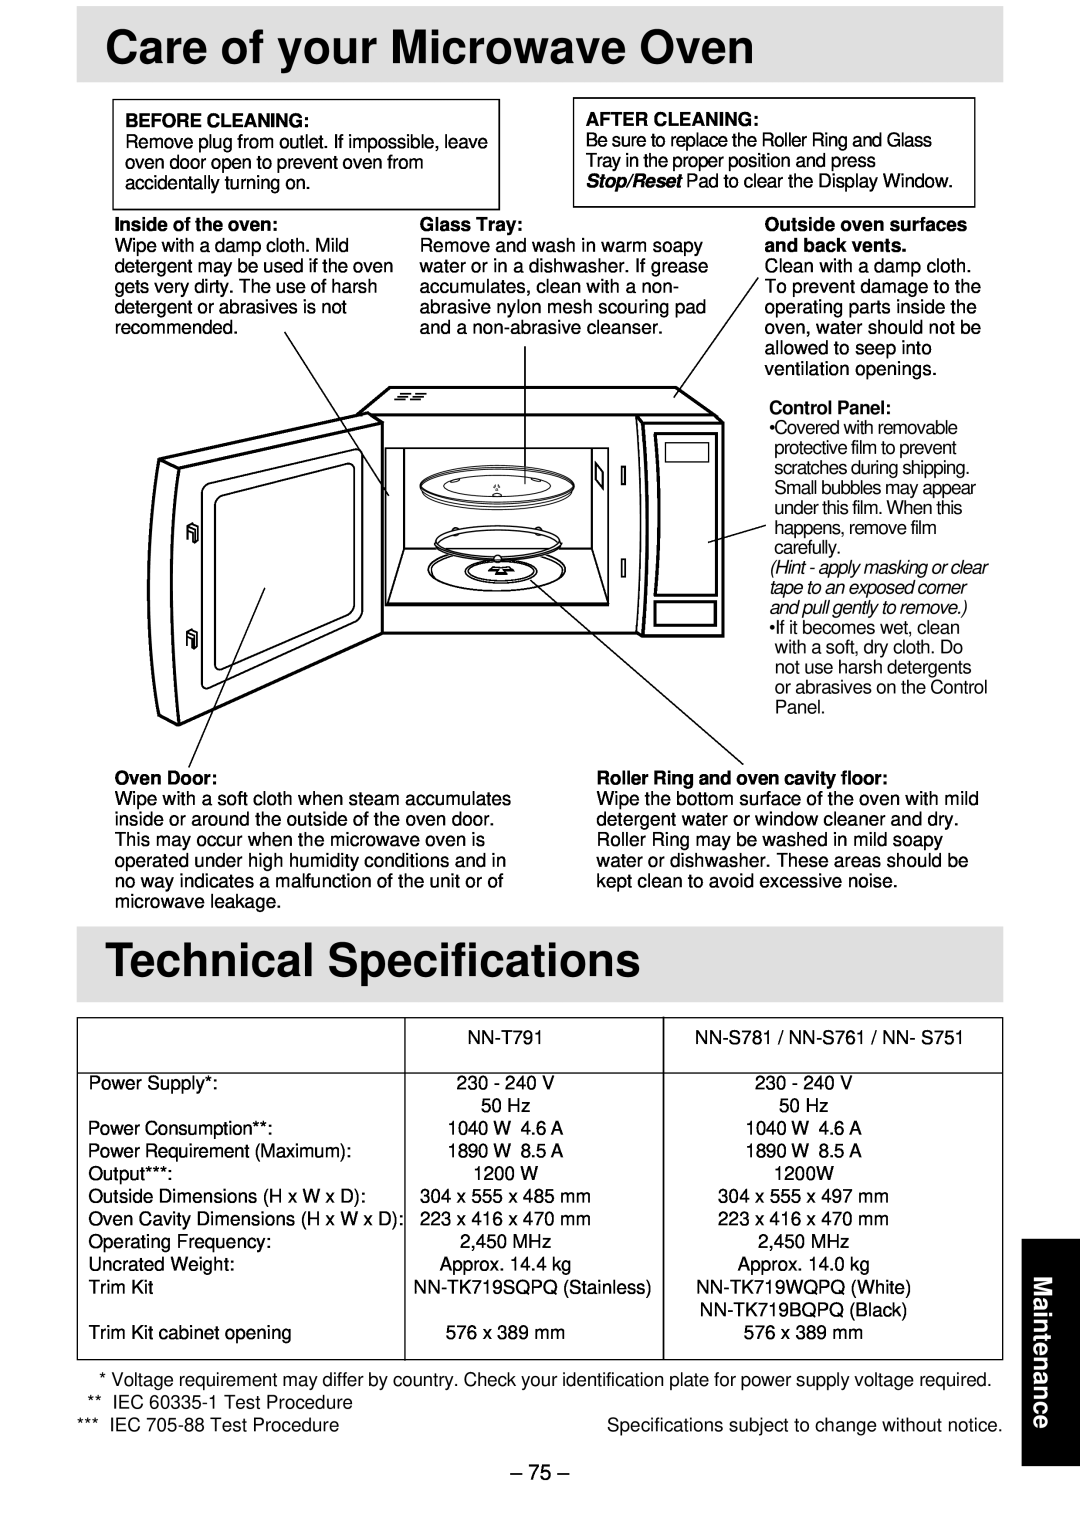 Panasonic NN-S781, NN-T791, NN-S761 manual Care of your Microwave Oven, Technical Specifications, Maintenance 